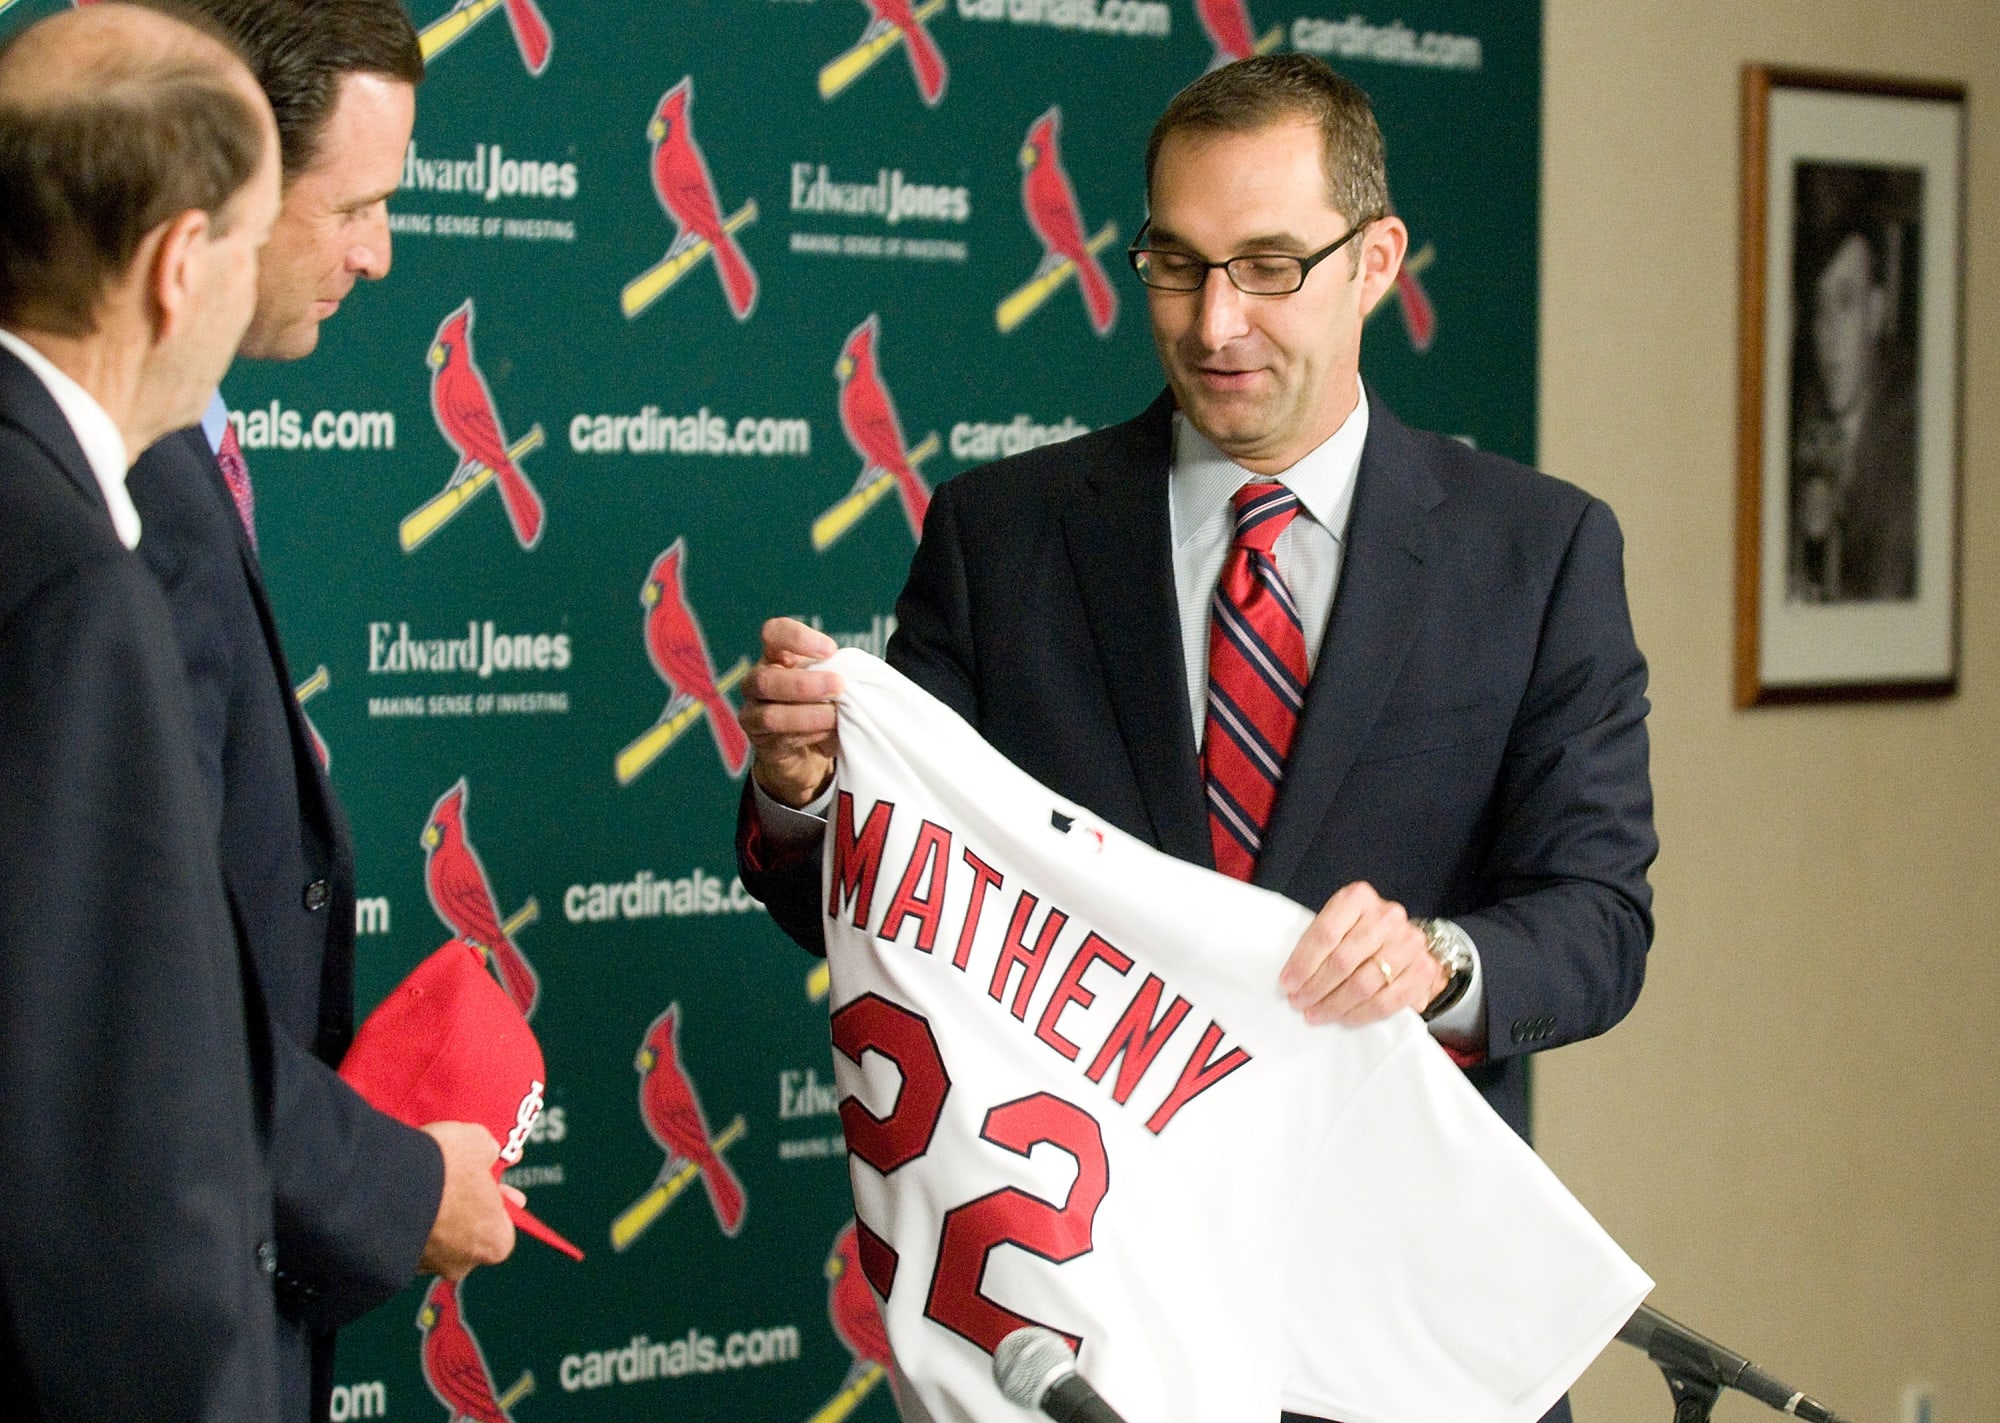 St. Louis Cardinals: FanSided MOCK GM meeting come to a close